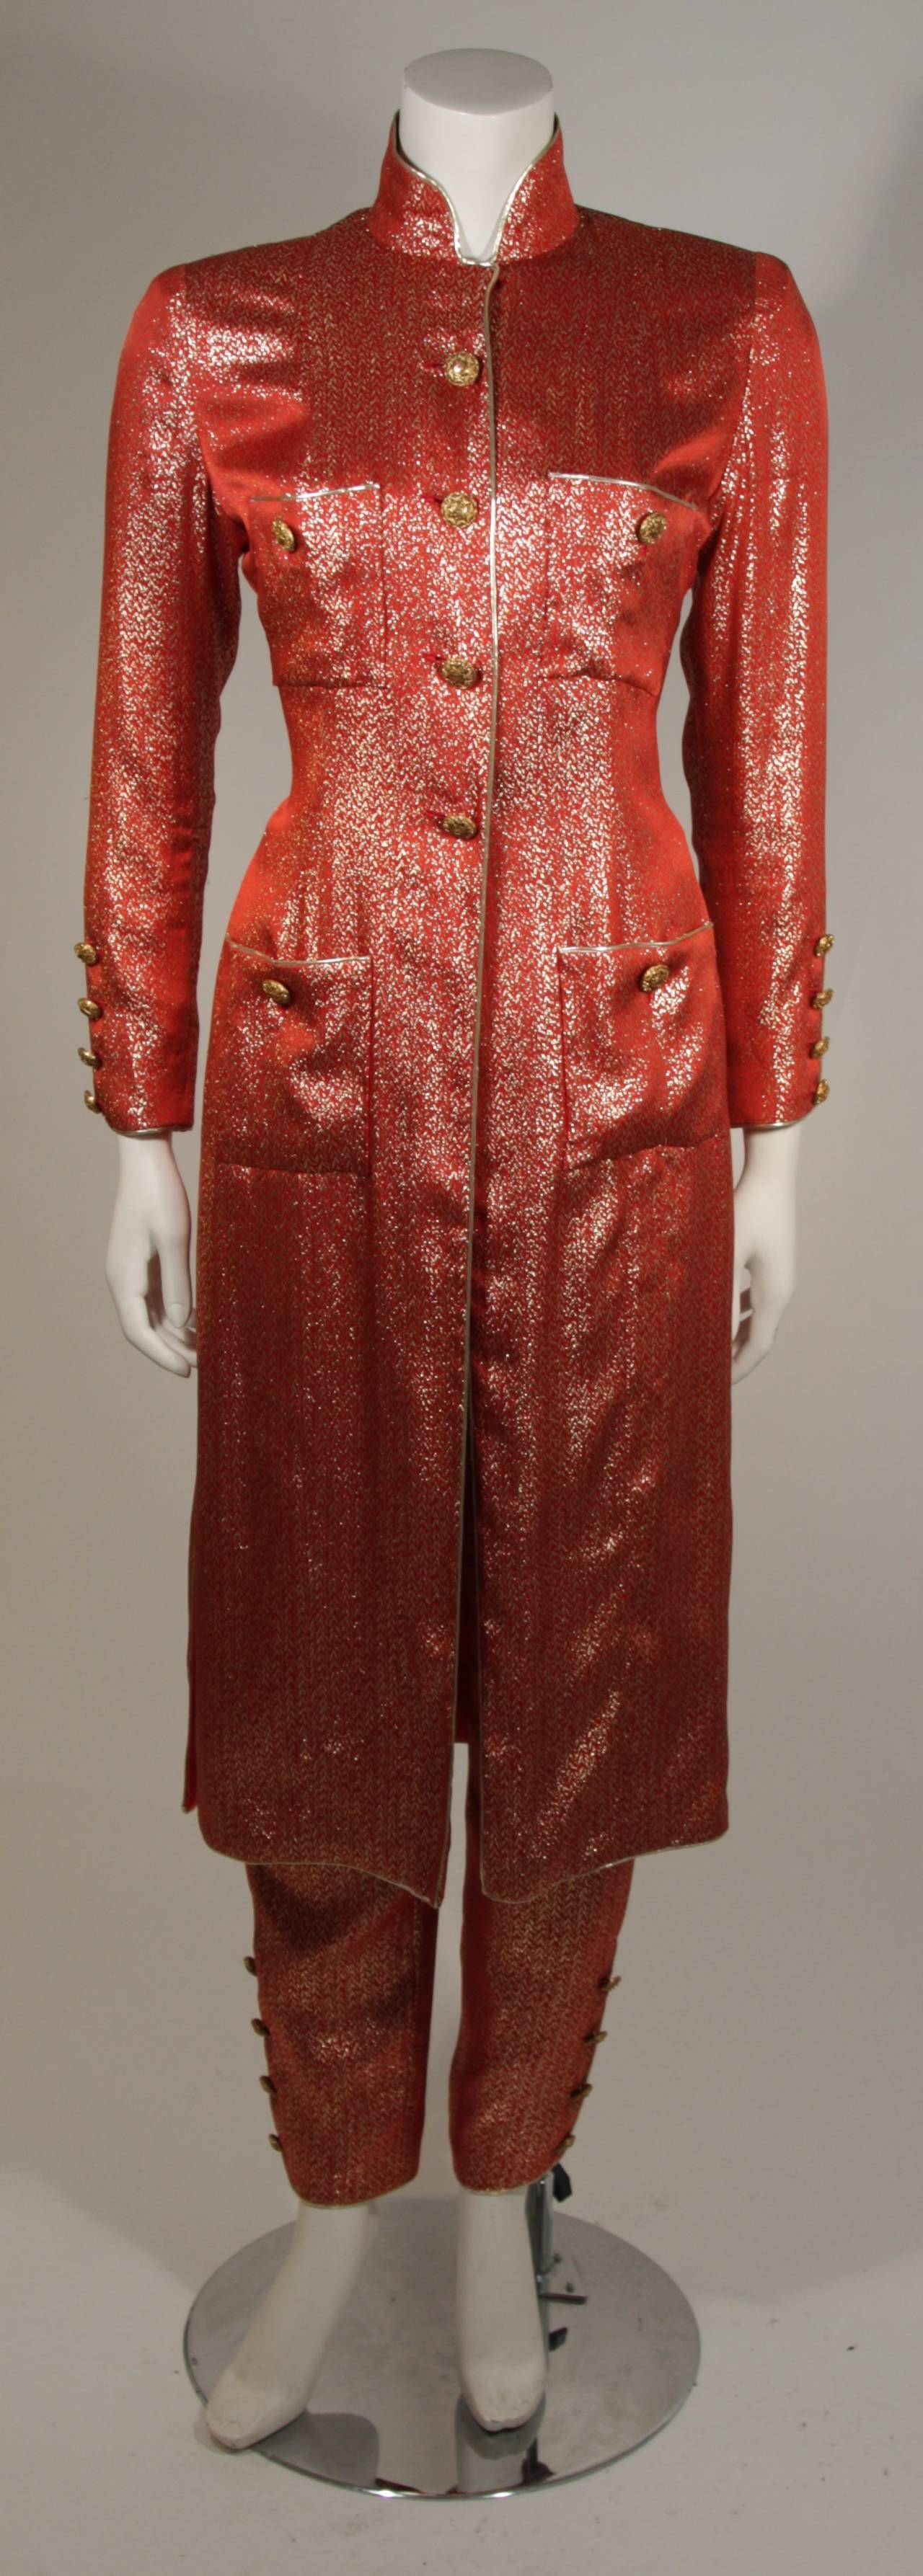 This Chanel suit is available for viewing at our Beverly Hills Boutique. The suit is composed of a silk lamé in an orange and gold variation and lined with a rich coral hued silk. The jacket features center front buttons, four front pockets, and a